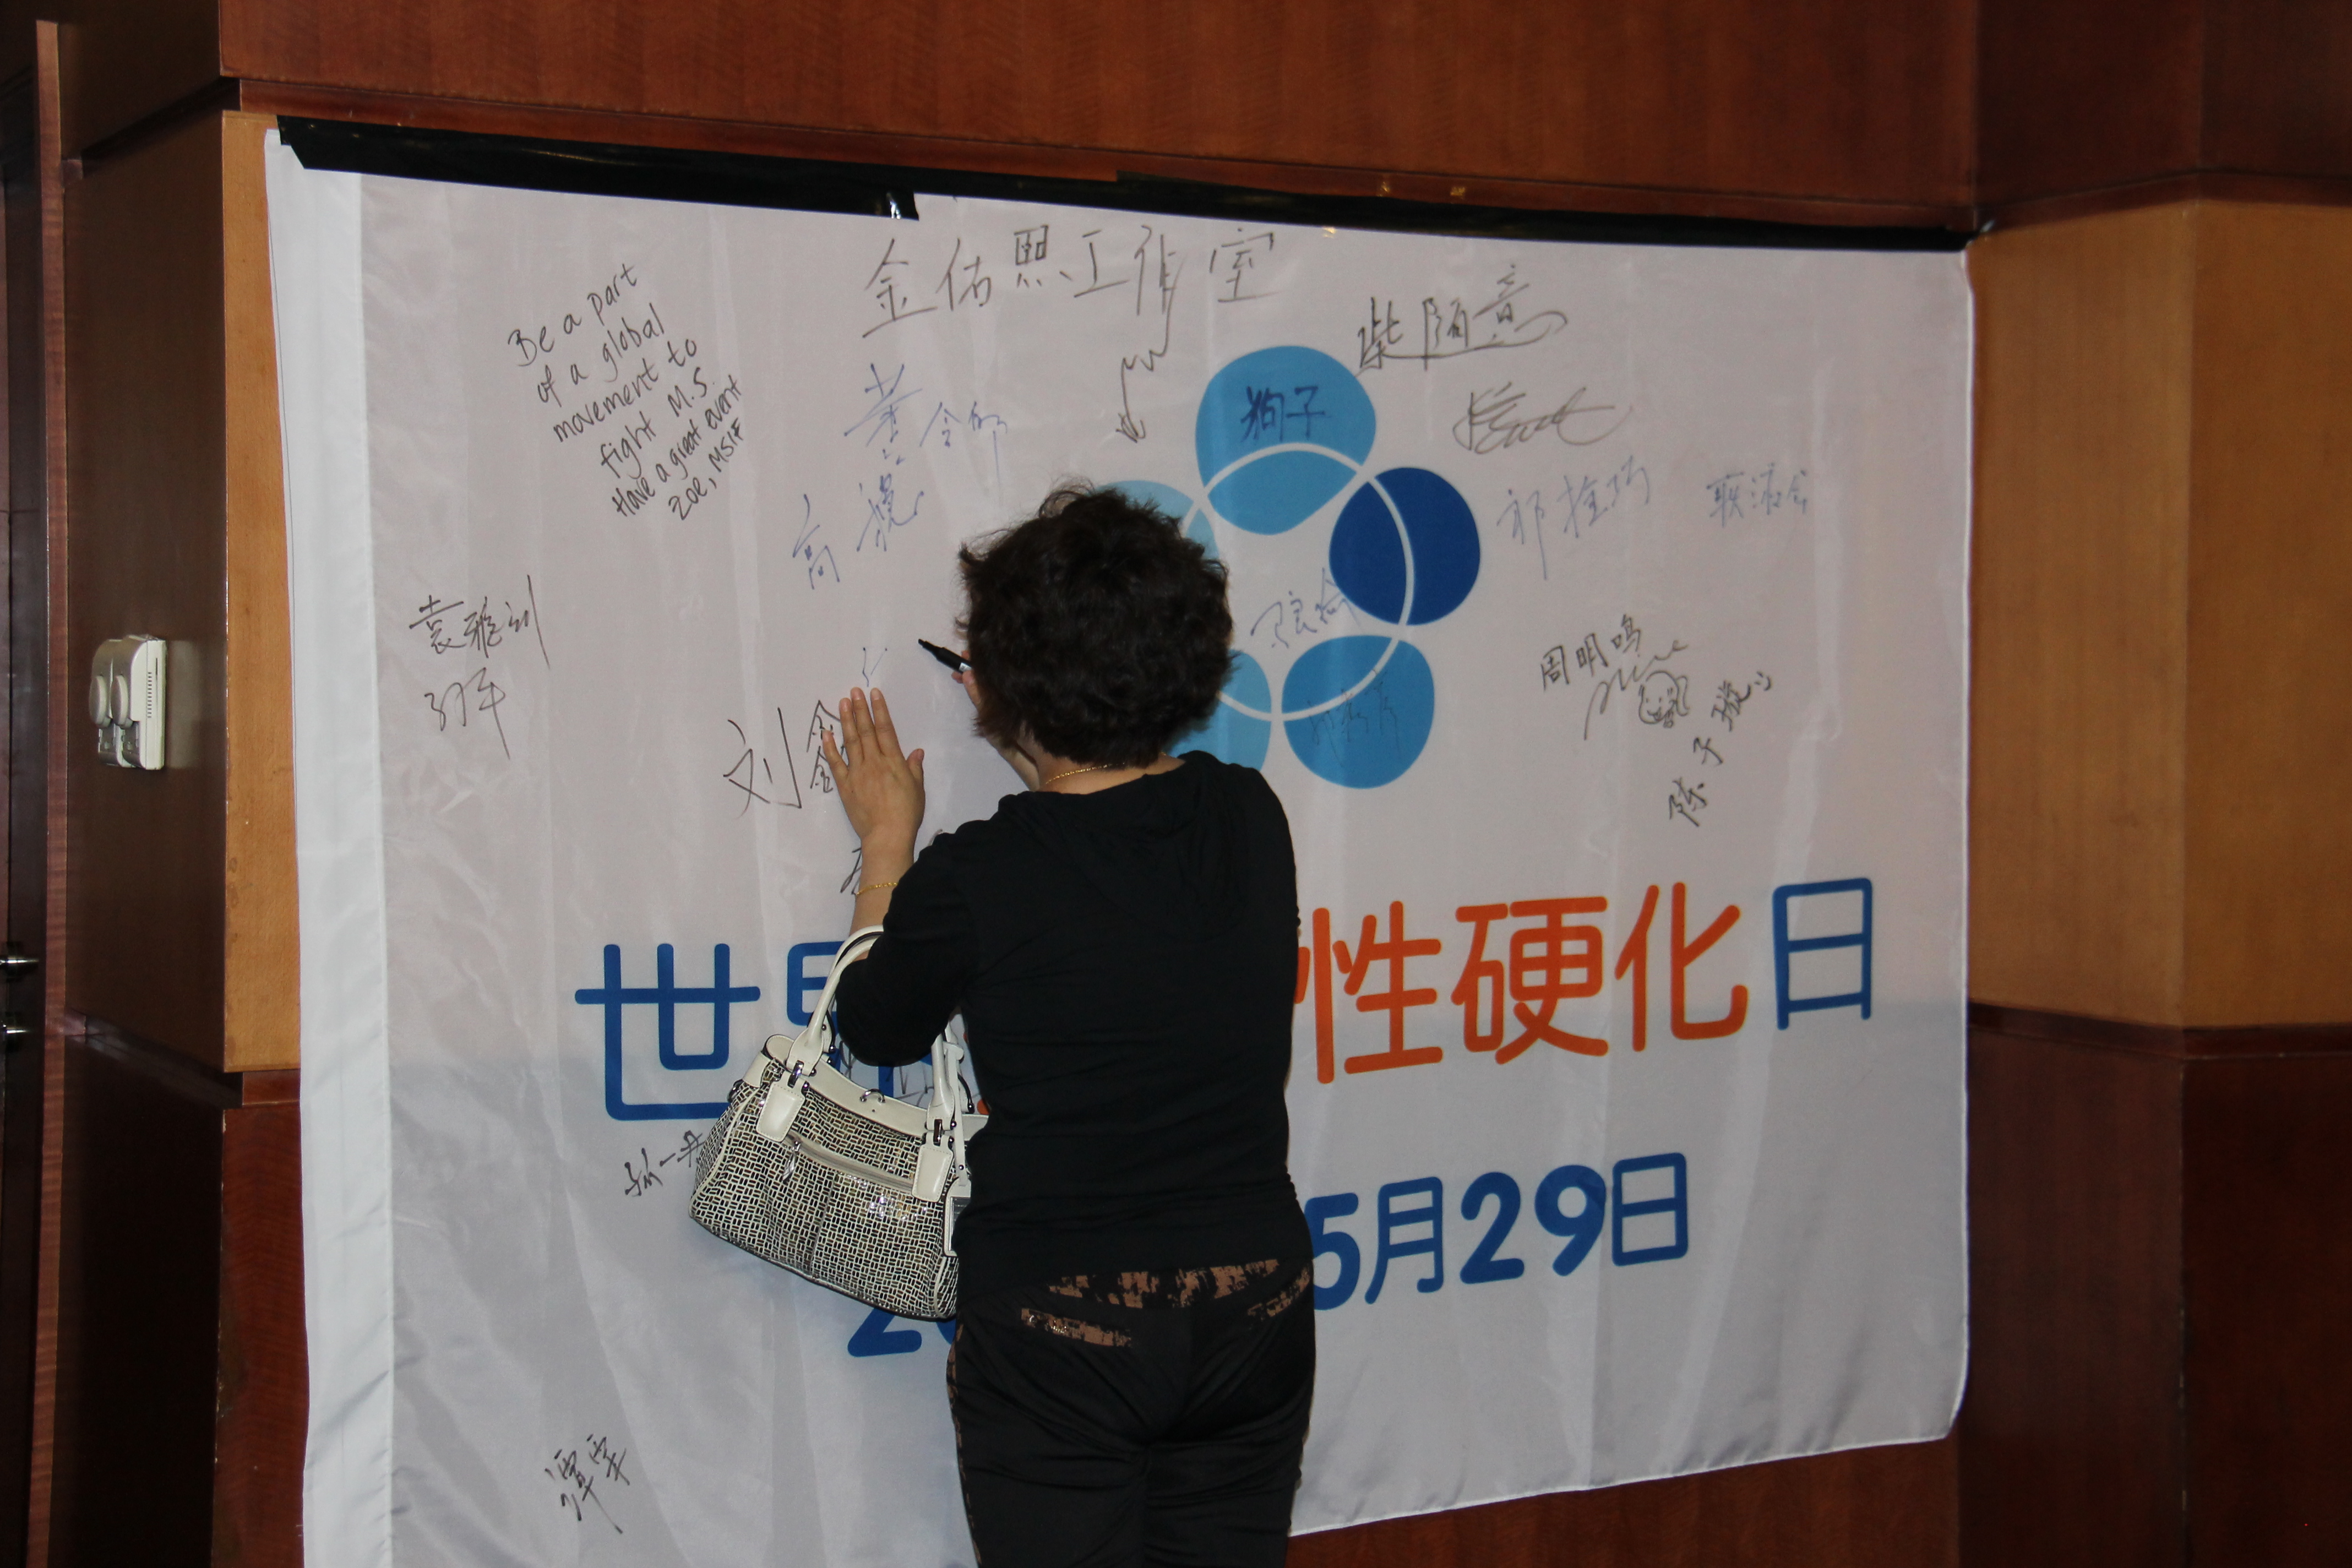 Signing the solidarity banner